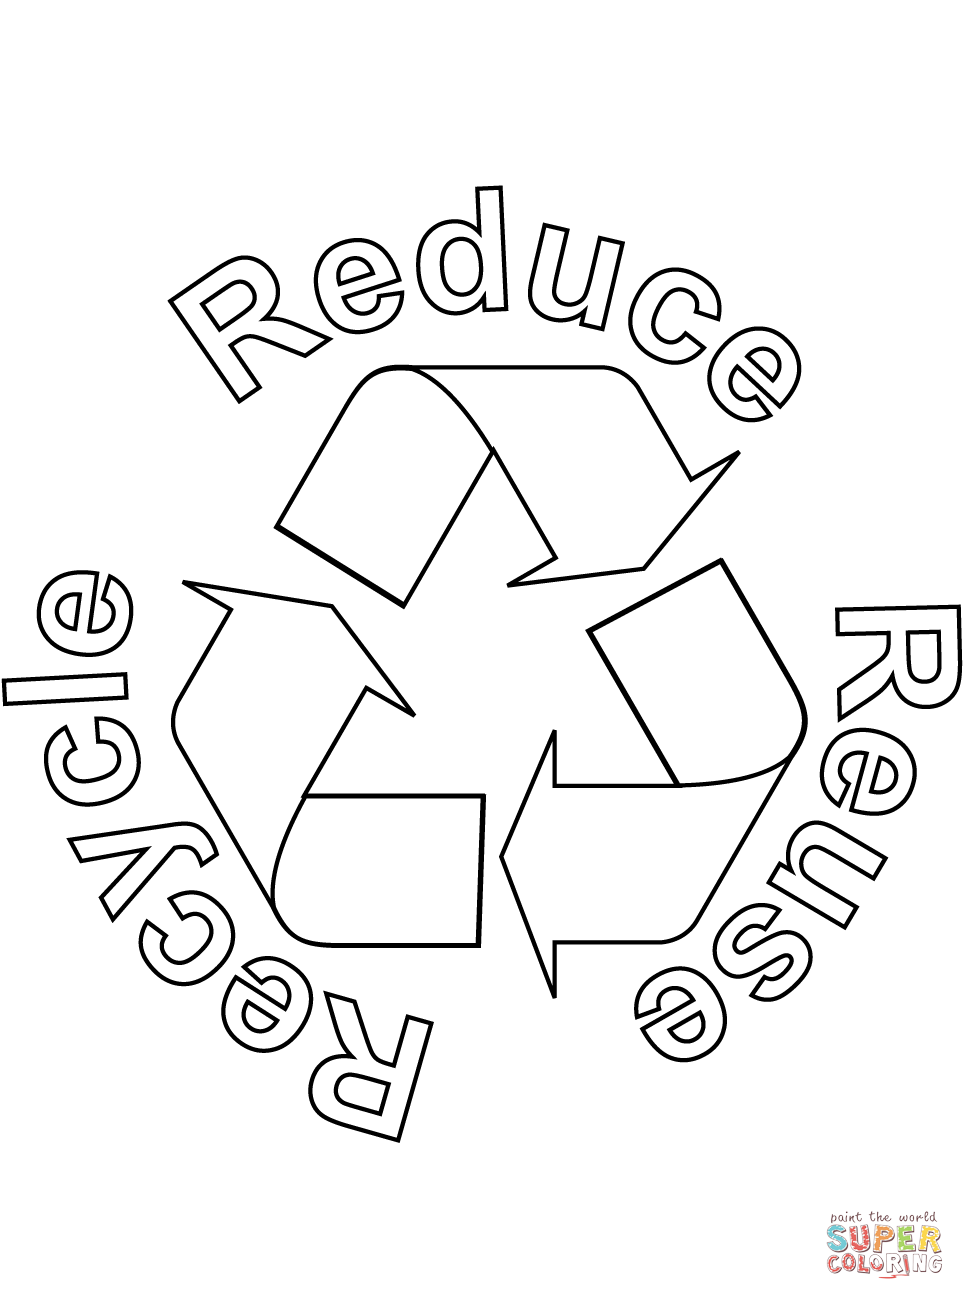 Reduce reuse recycle coloring page free printable coloring pages